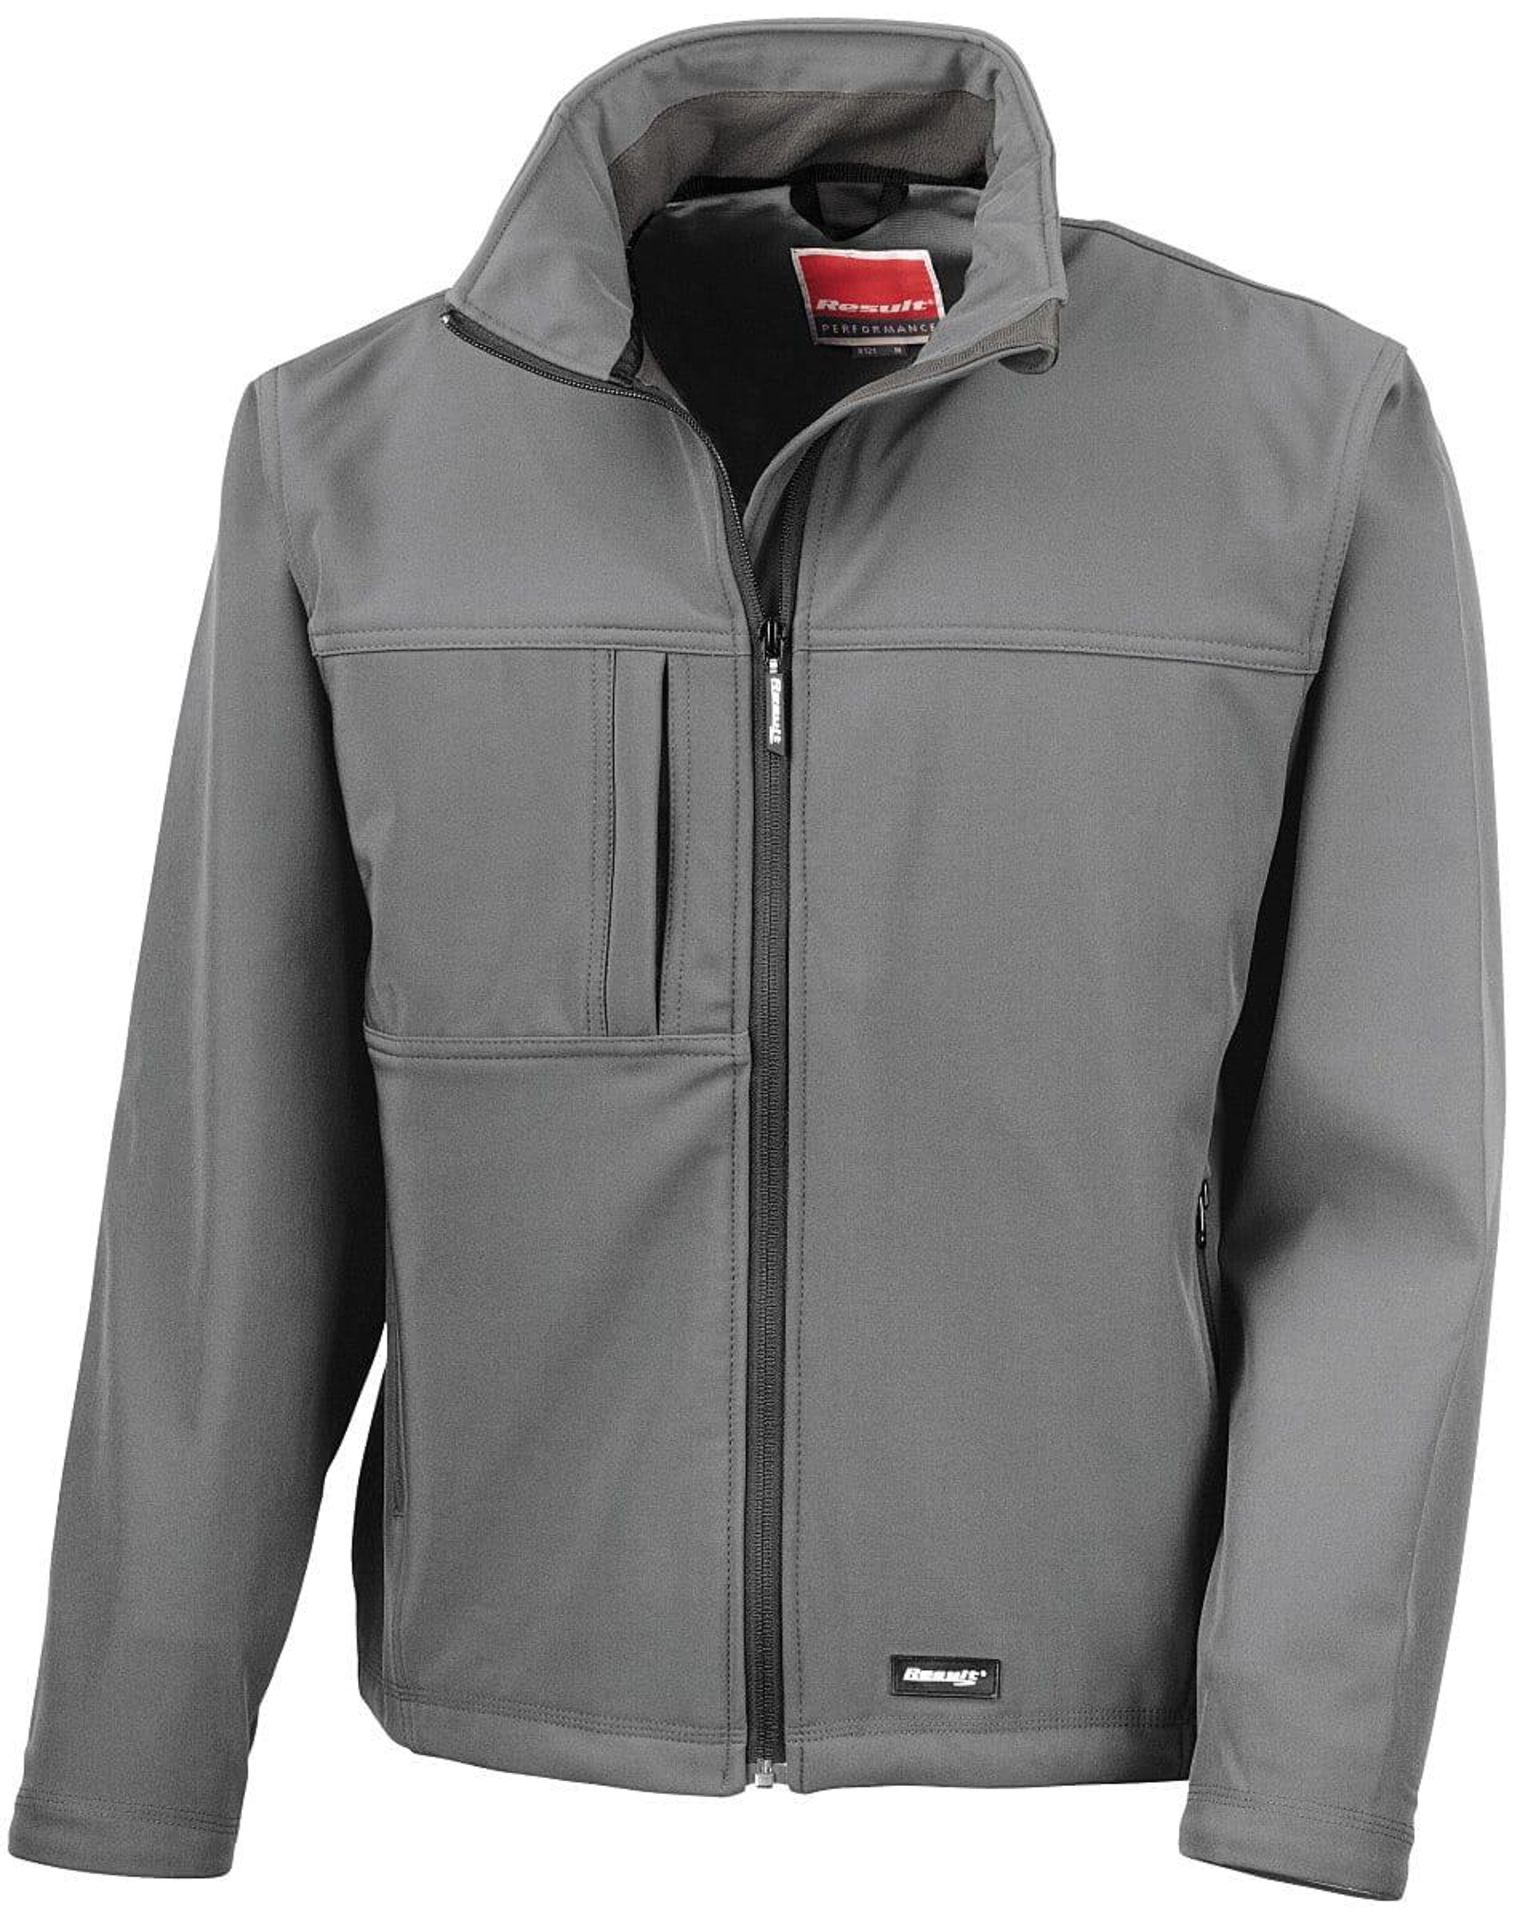 RRP £29.99 each 2 x Result Classic Soft Shell Jackets - Large RRP 29.99 ea